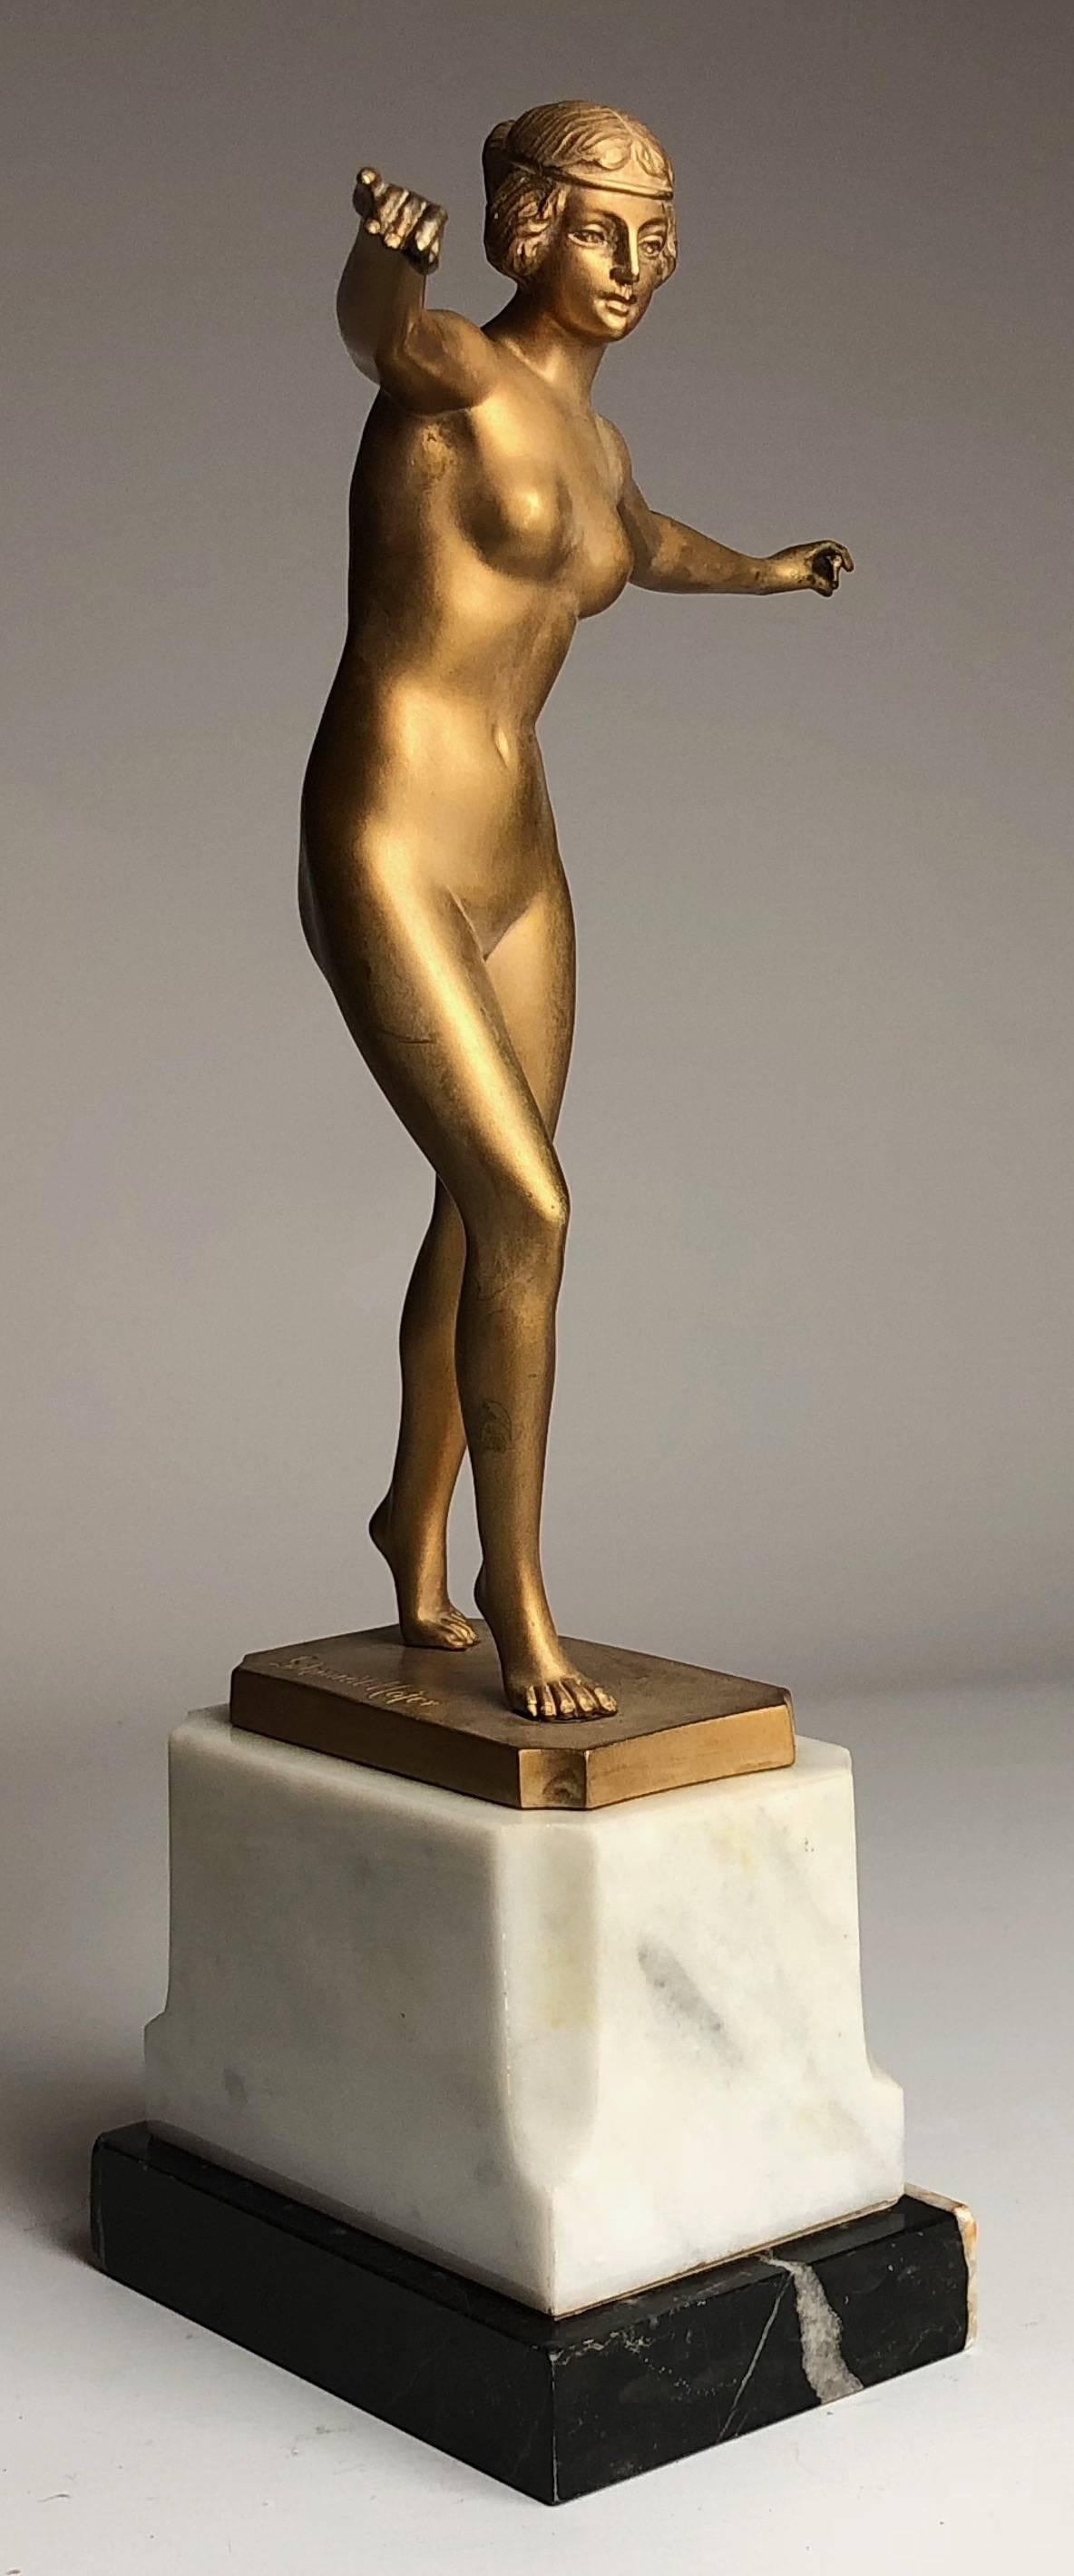 A good Art Deco figure by Otto Schmidt Hofer.
On a marble base

She stands just under 12" tall

French, circa 1920.